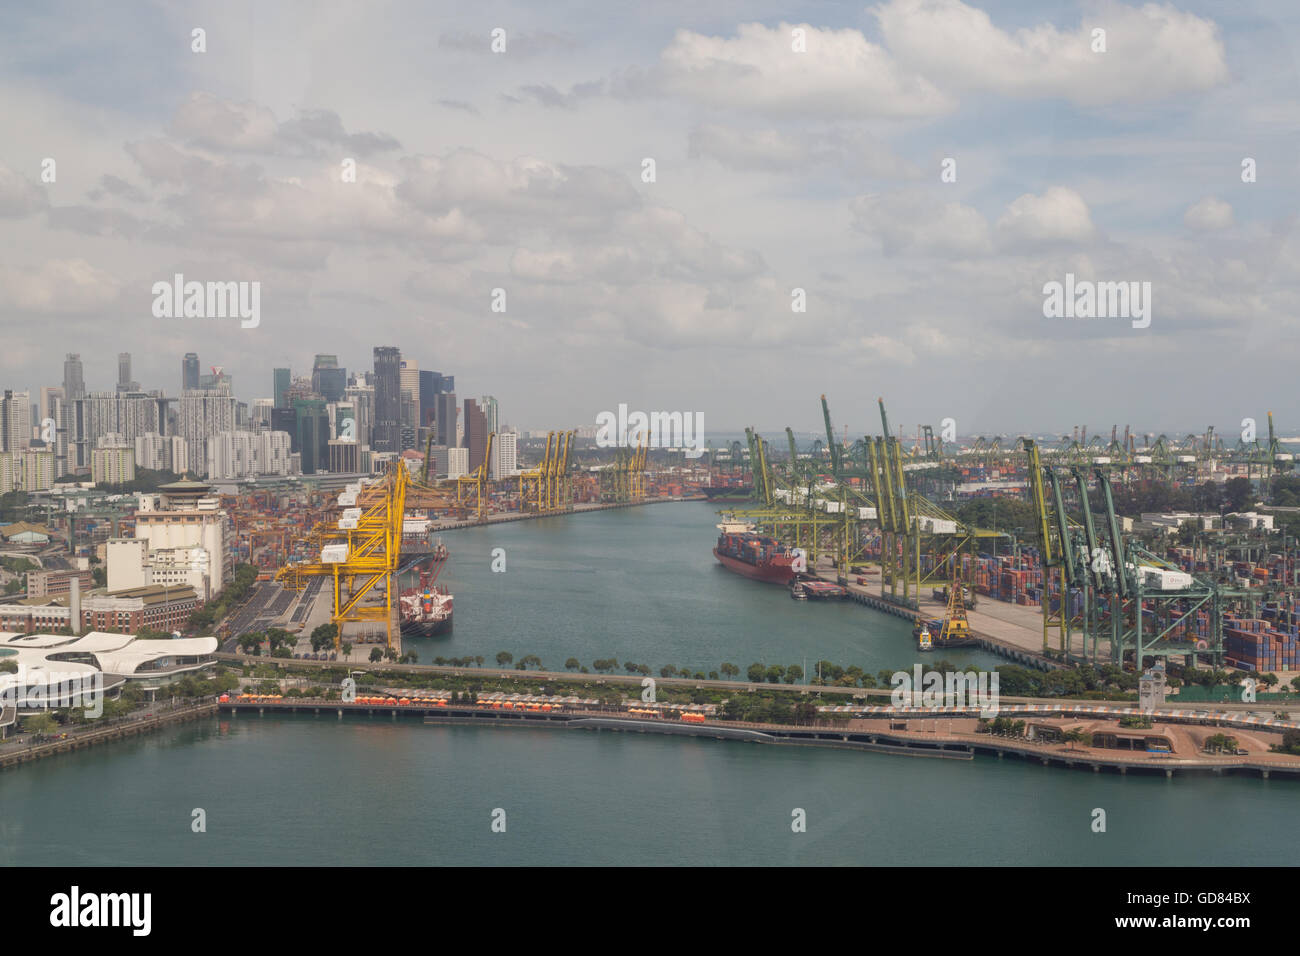 Singapore, Singapore - February 02, 2015: Aerial view of the container terminal Stock Photo